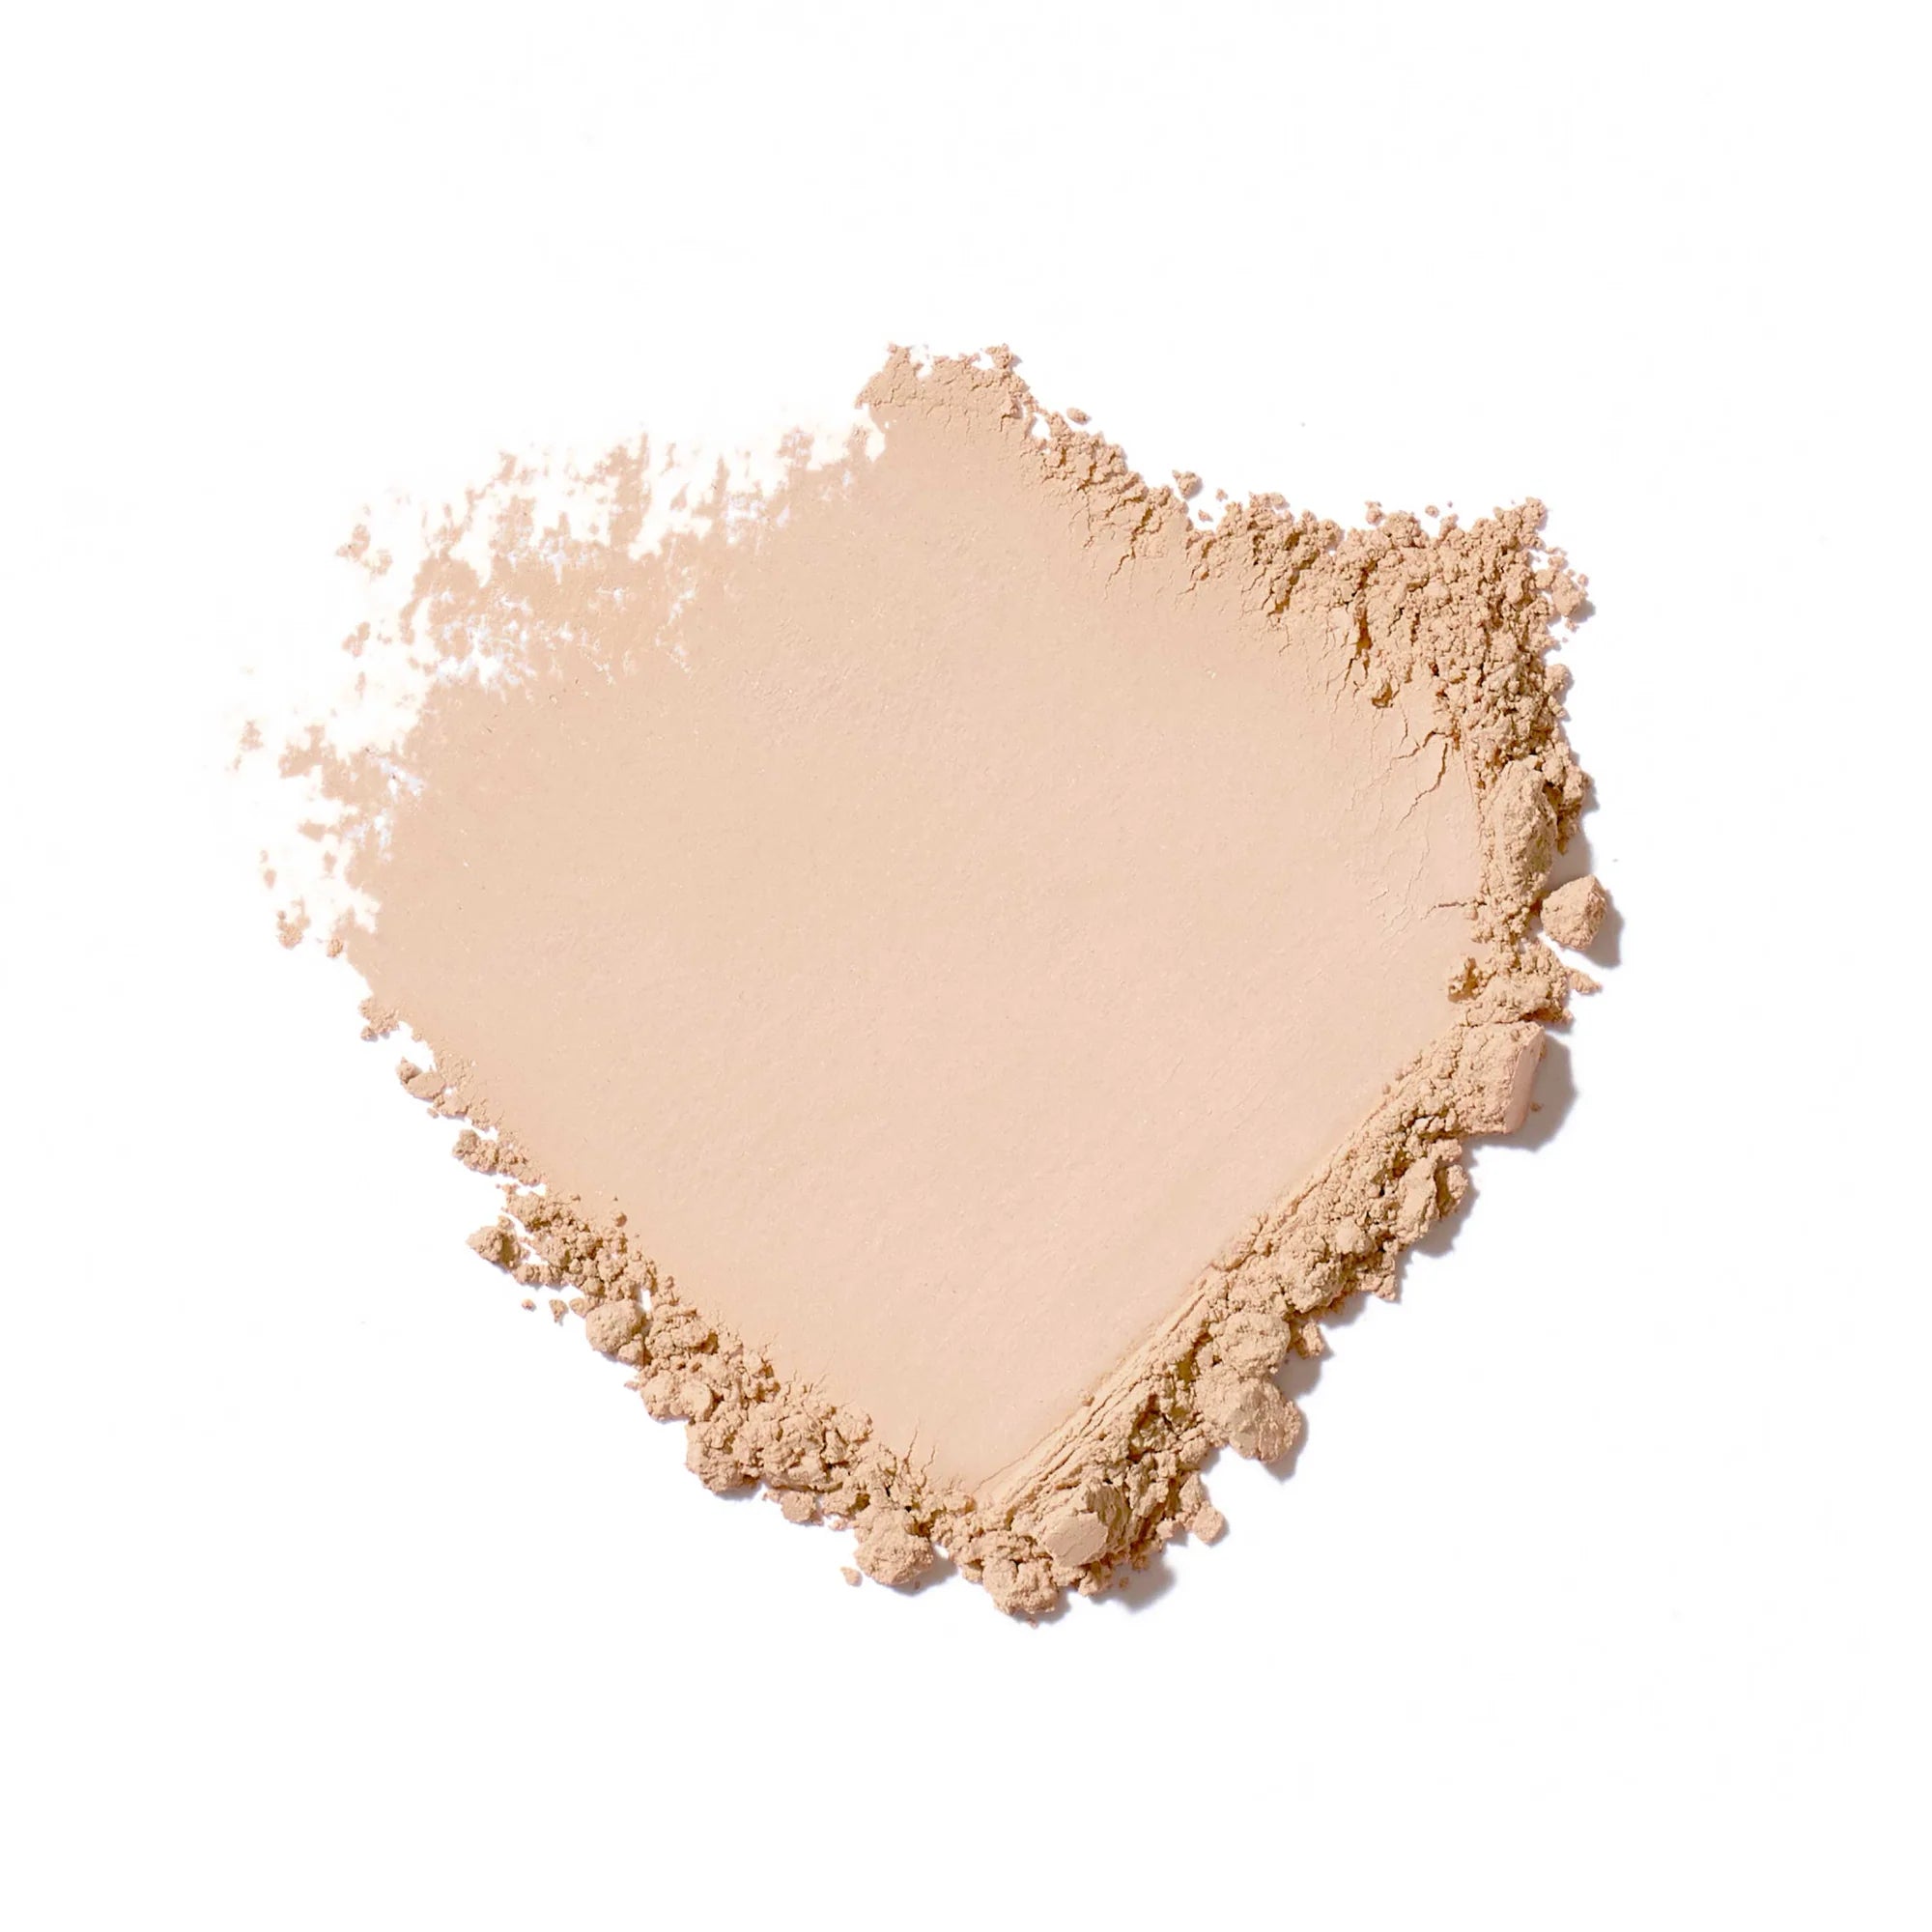 Jane Iredale's Amazing Base® Loose Mineral Powder Refill Brush - shade Natural - Medium Light with pink undertones